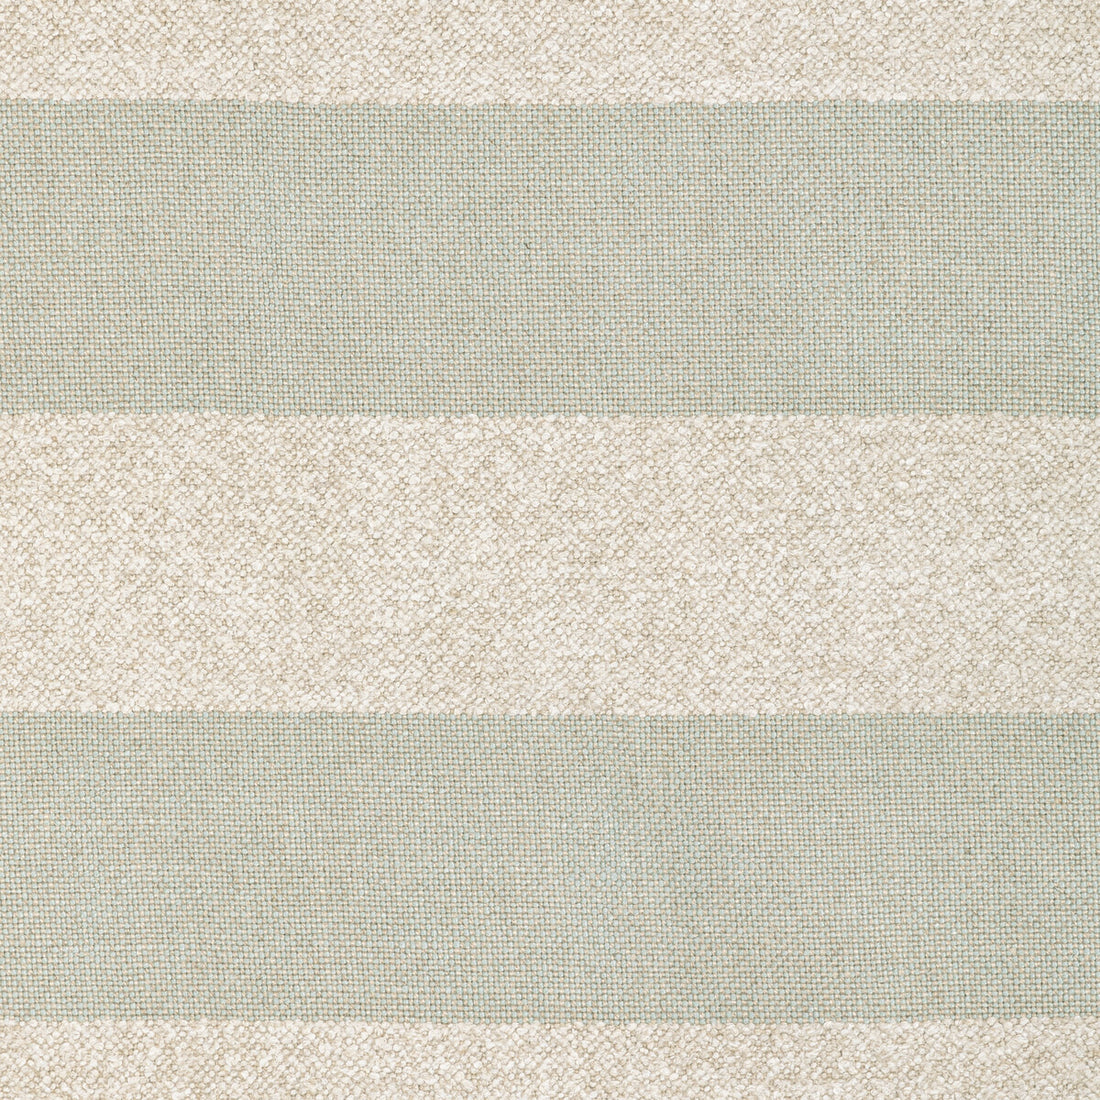 Summit Stripe fabric in agave color - pattern 36378.1630.0 - by Kravet Couture in the Barbara Barry Ojai collection